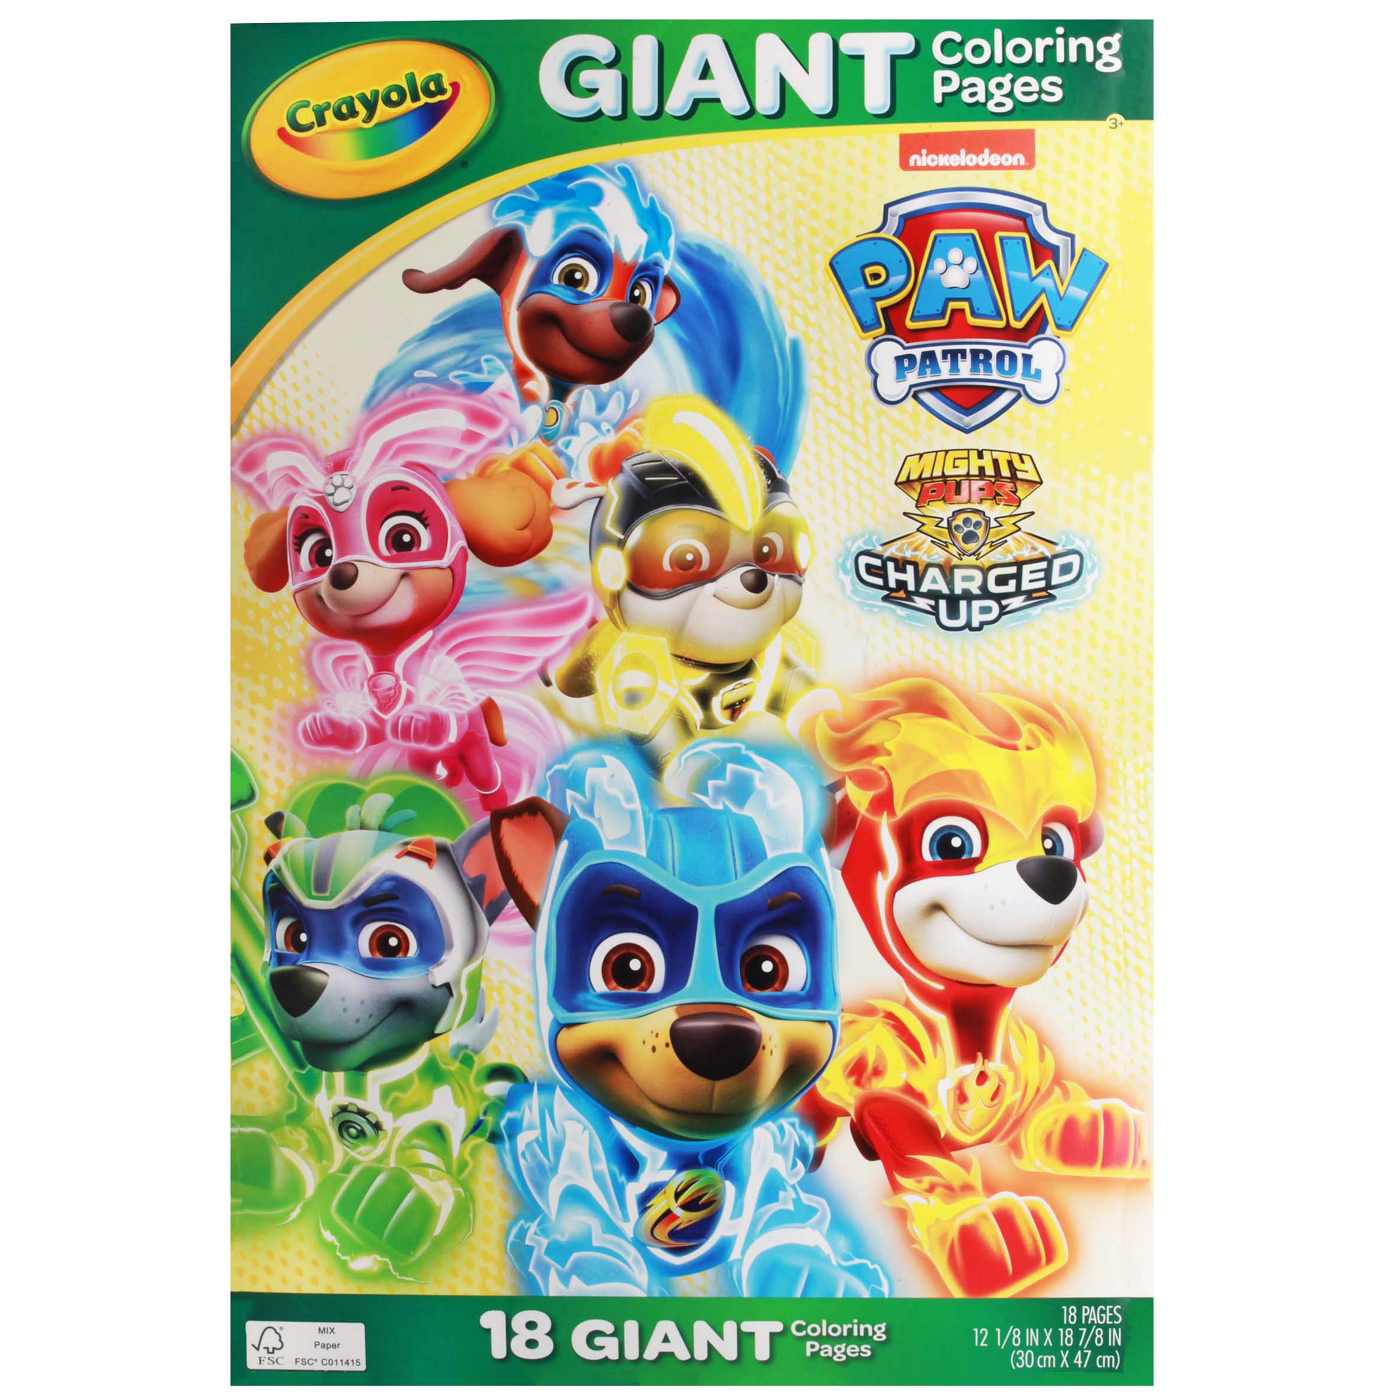 Crayola Paw Patrol Giant Coloring Pages; image 1 of 2